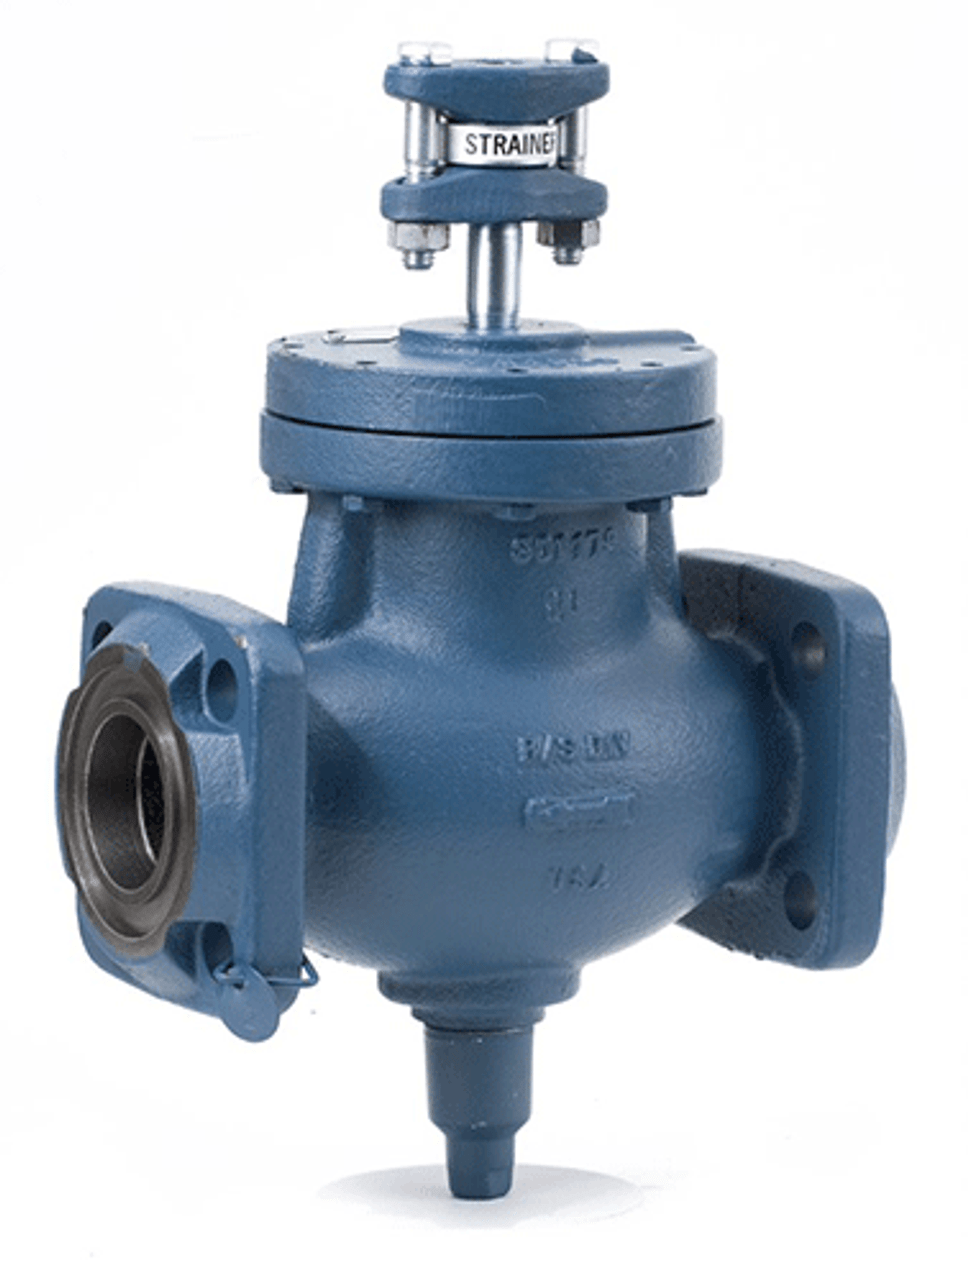 CK2A0F10X00NSN - 4" CK-2 Gas Powered Suction Stop Valve, Less Flanges And Pilot